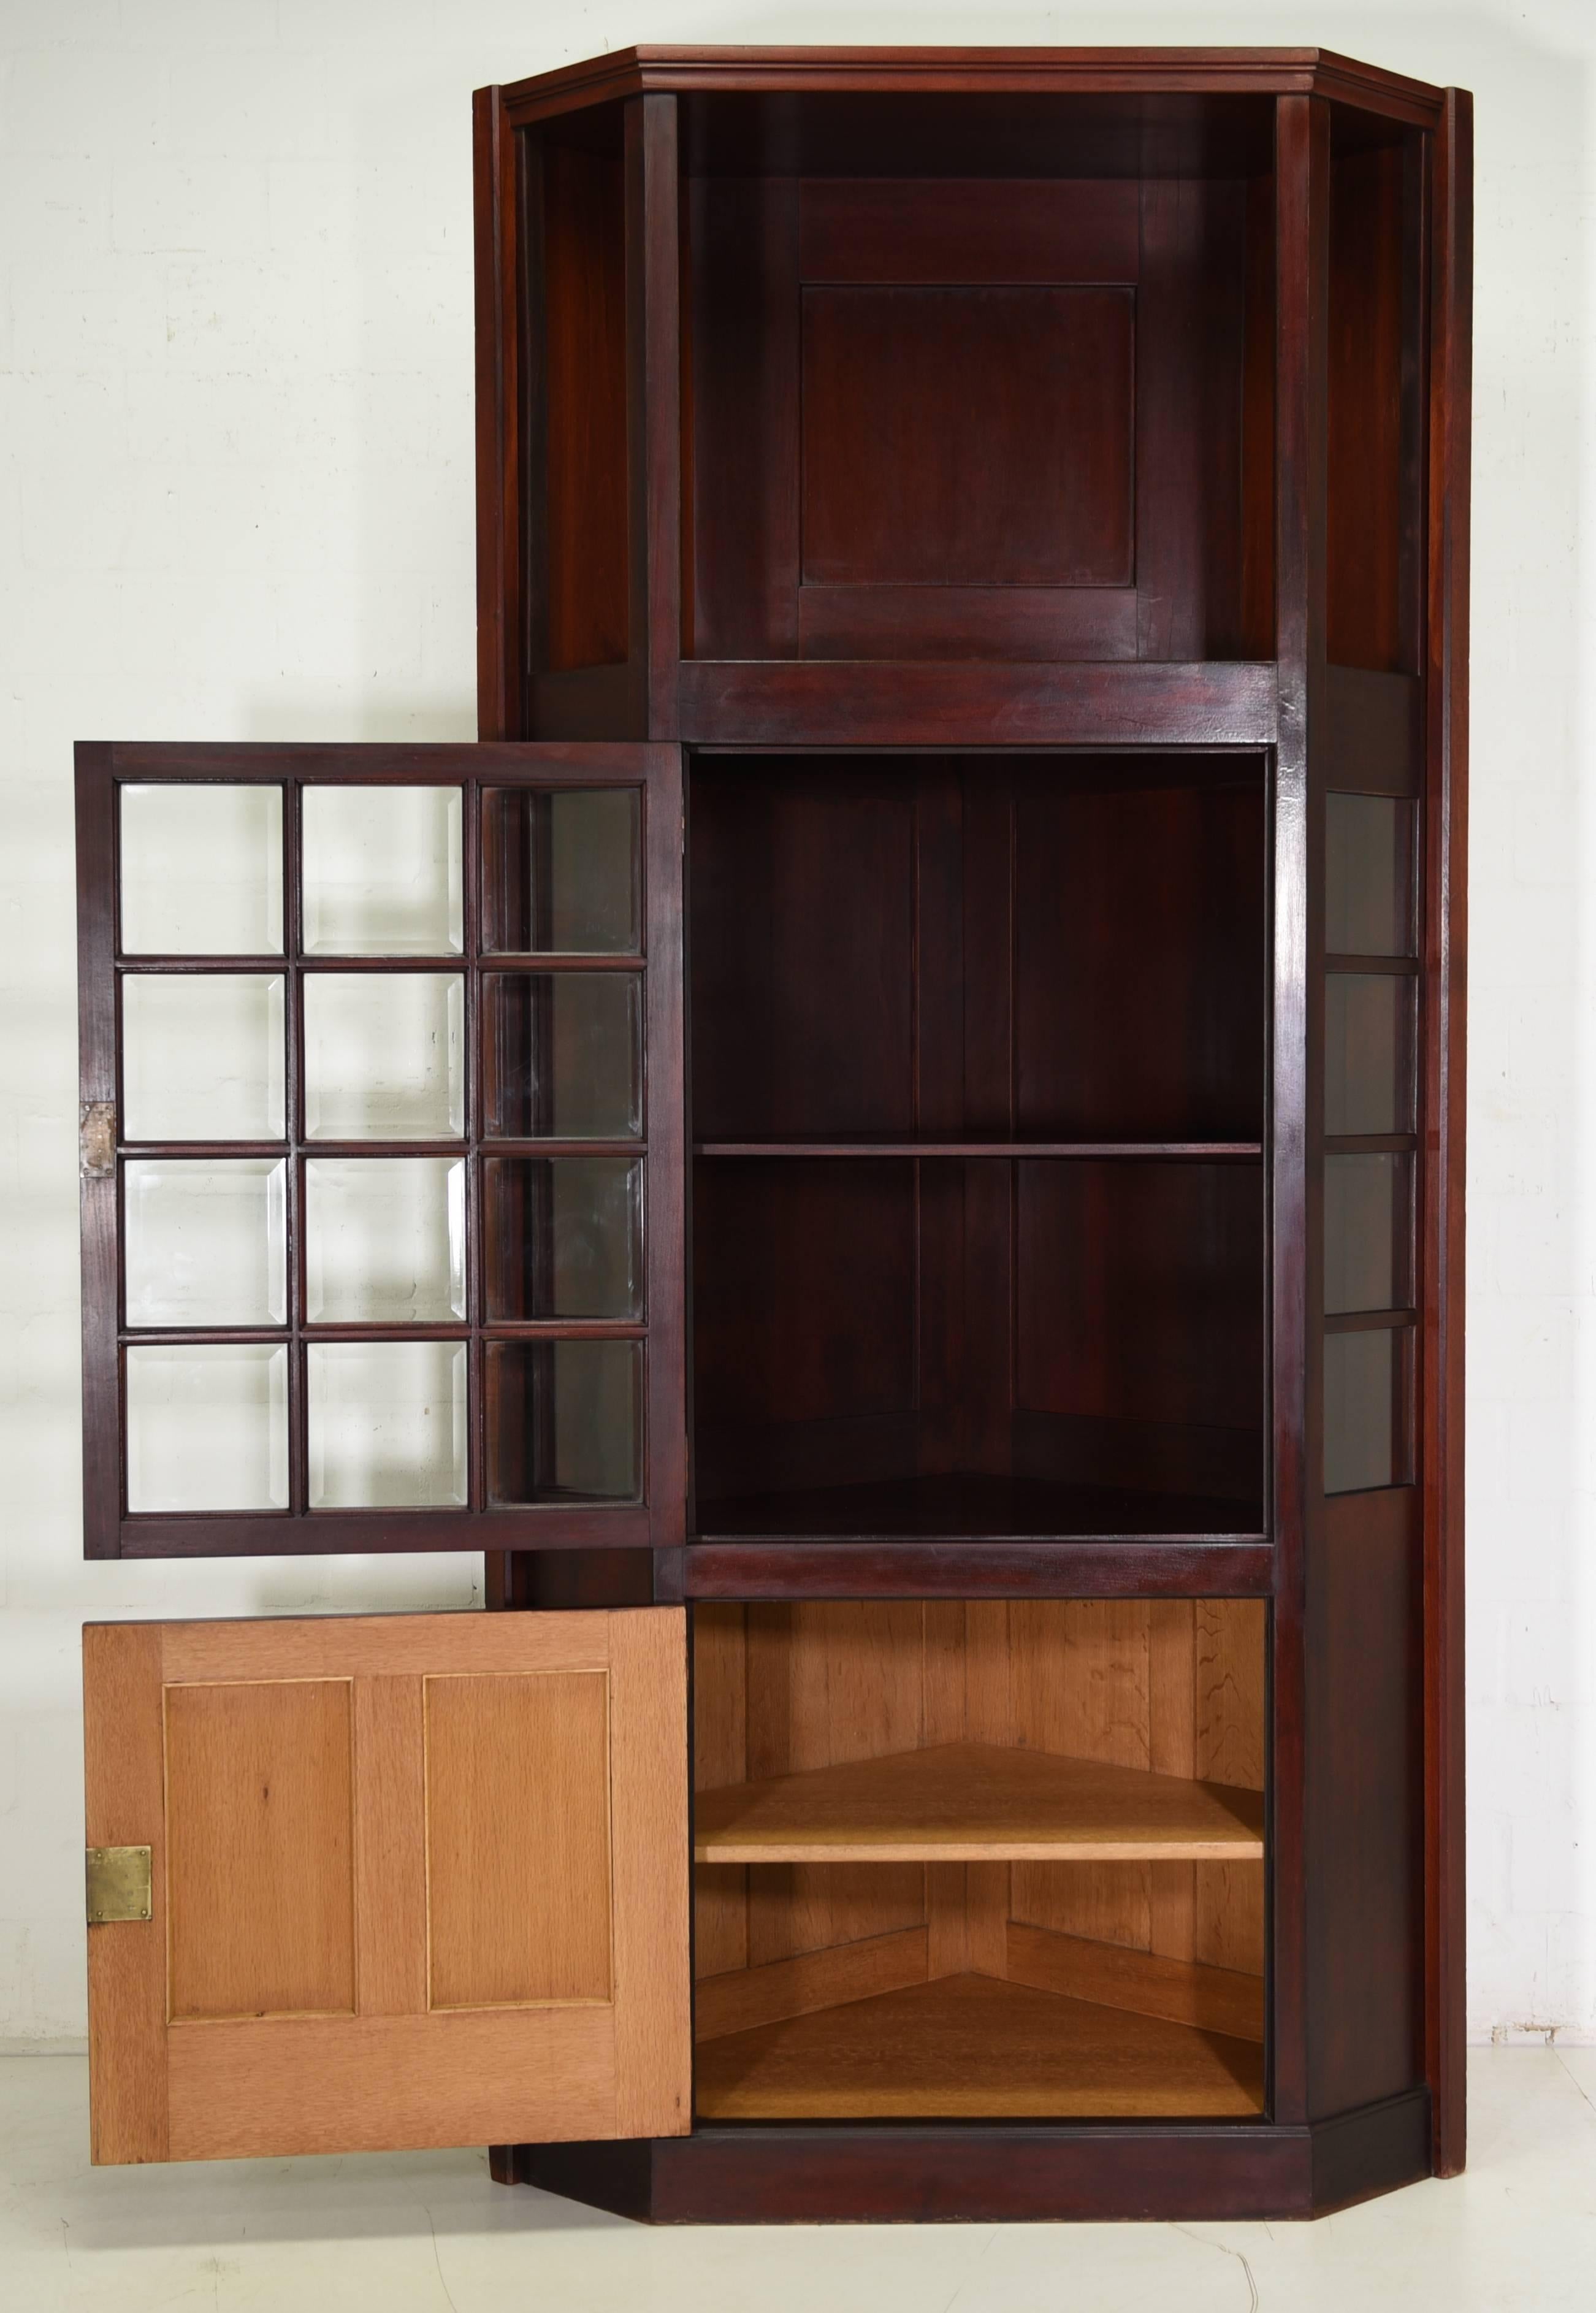 Early 20th Century Art Nouveau Corner Cupboard from circa 1915